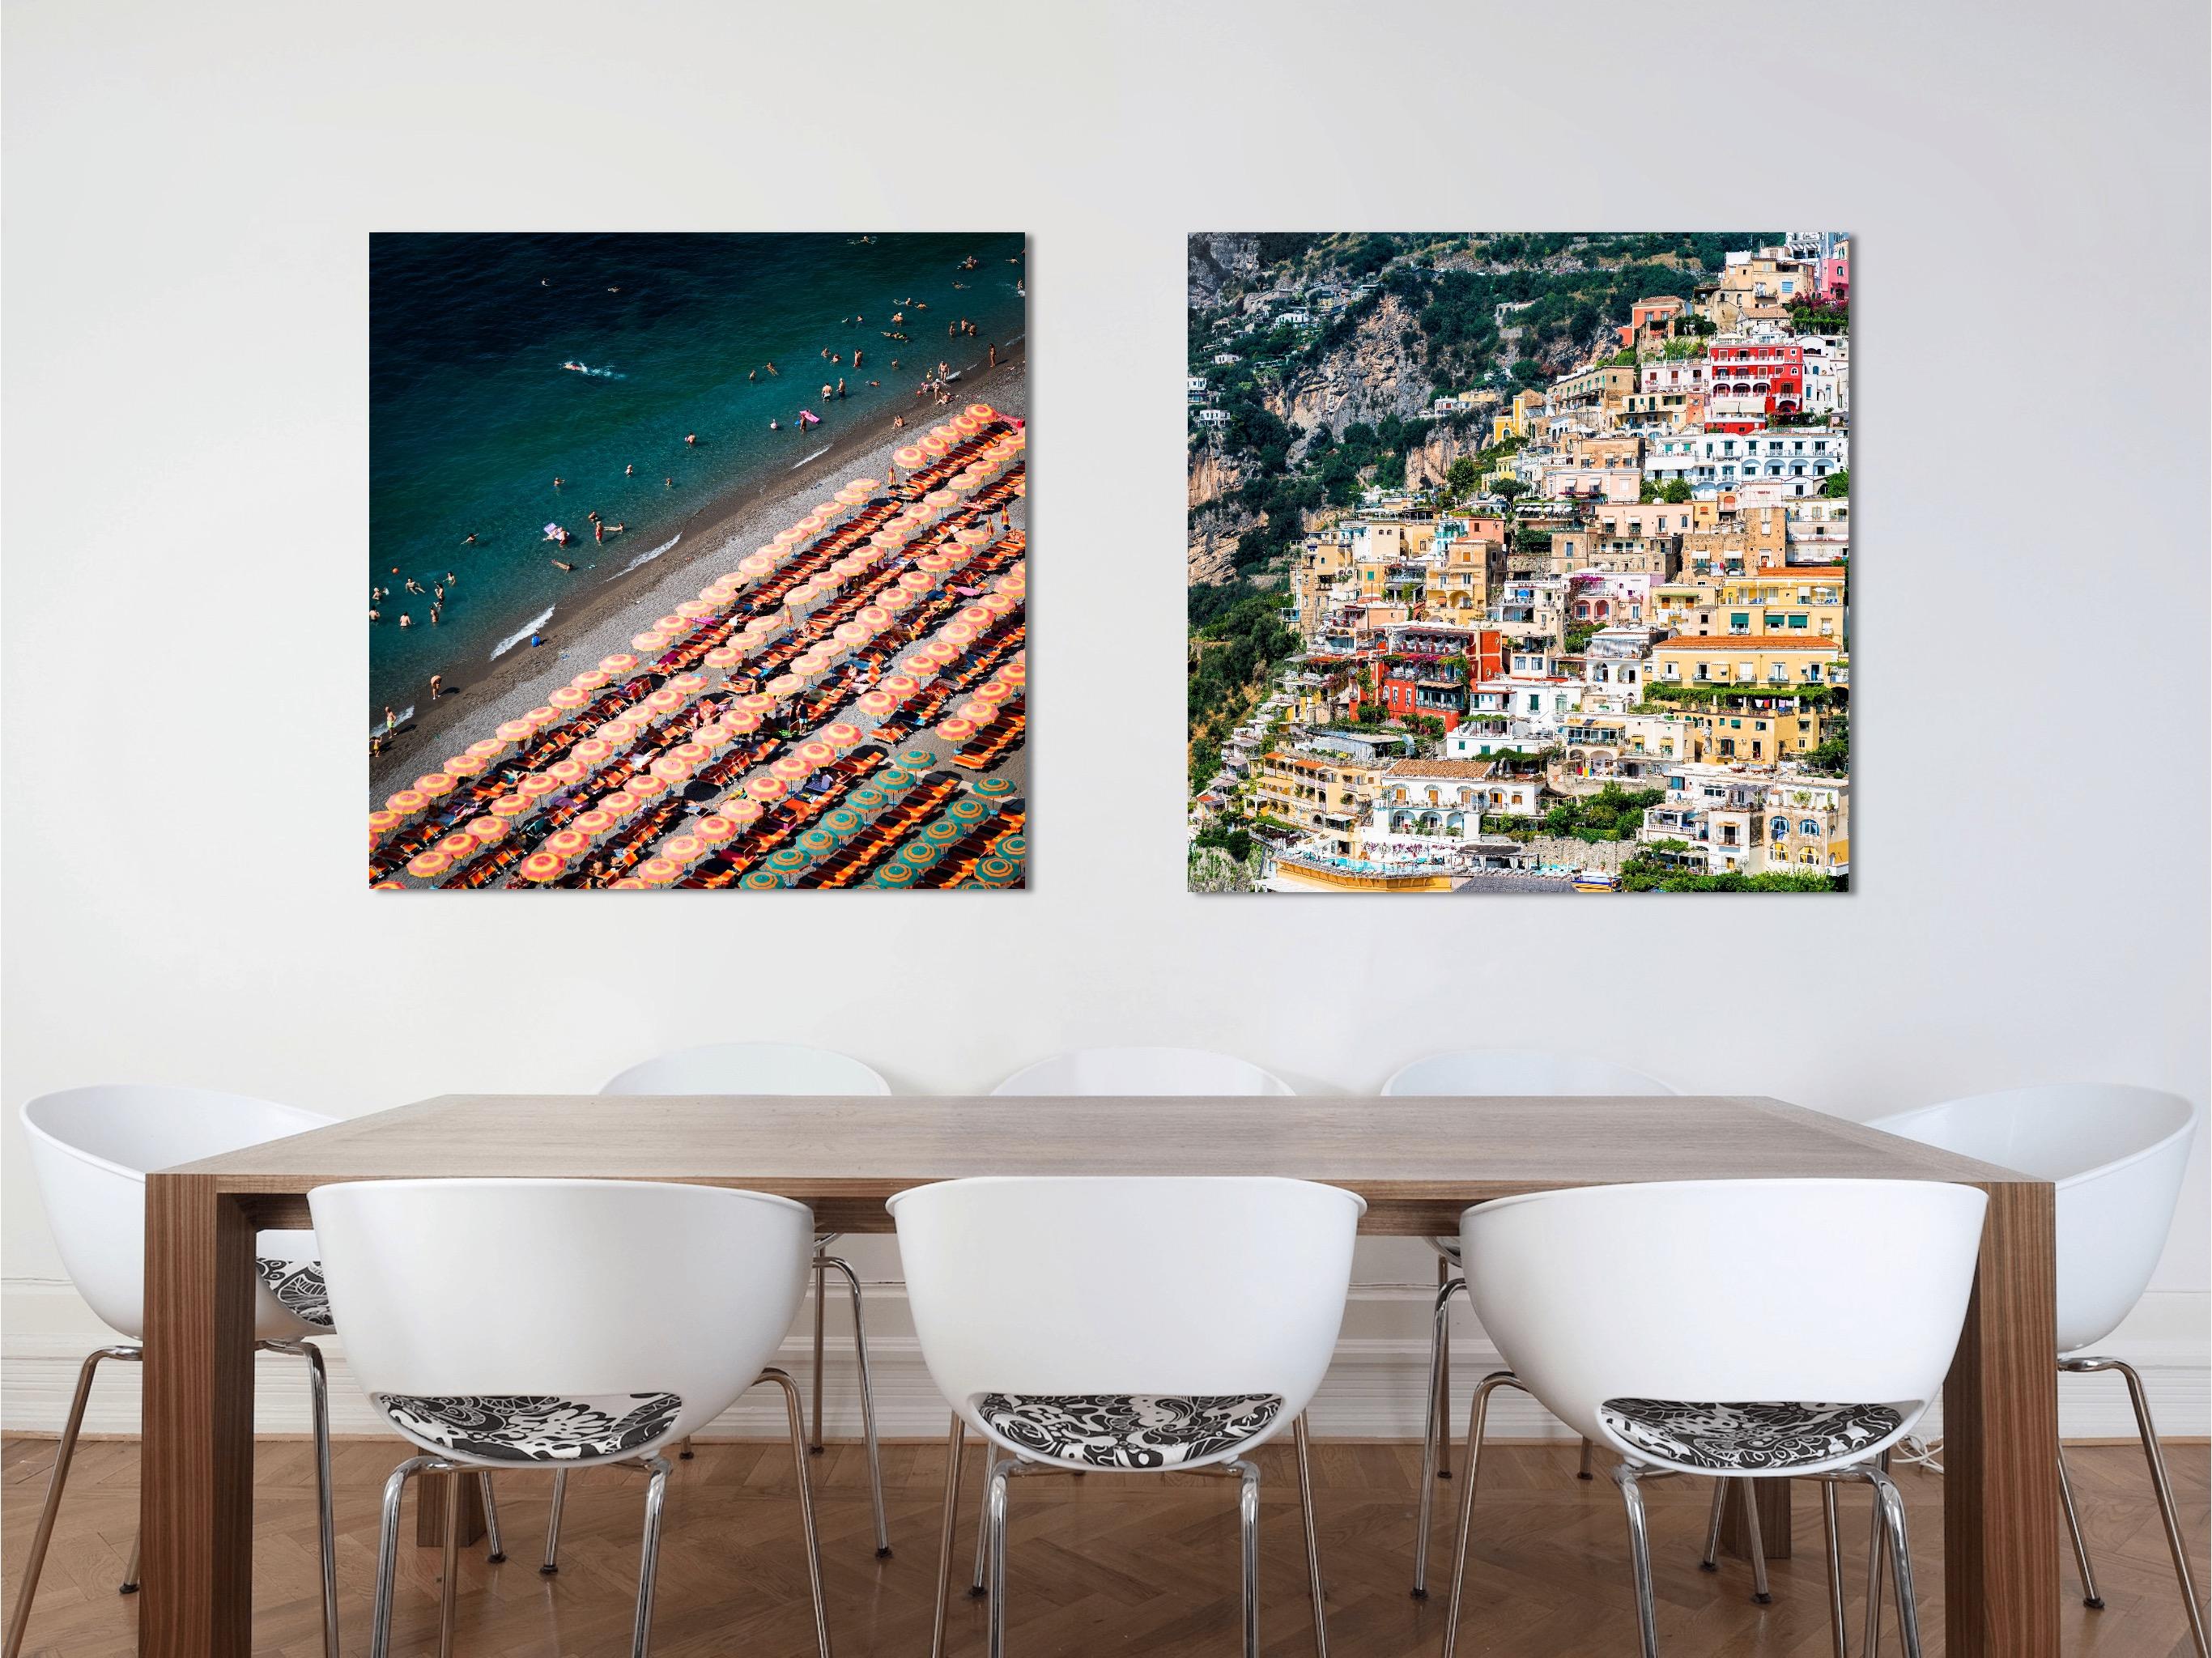 This contemporary coastal photograph by Peter Mendelson captures a sunny, summer day on a beach along the Amalfi Coast in Italy. The title, meaning 